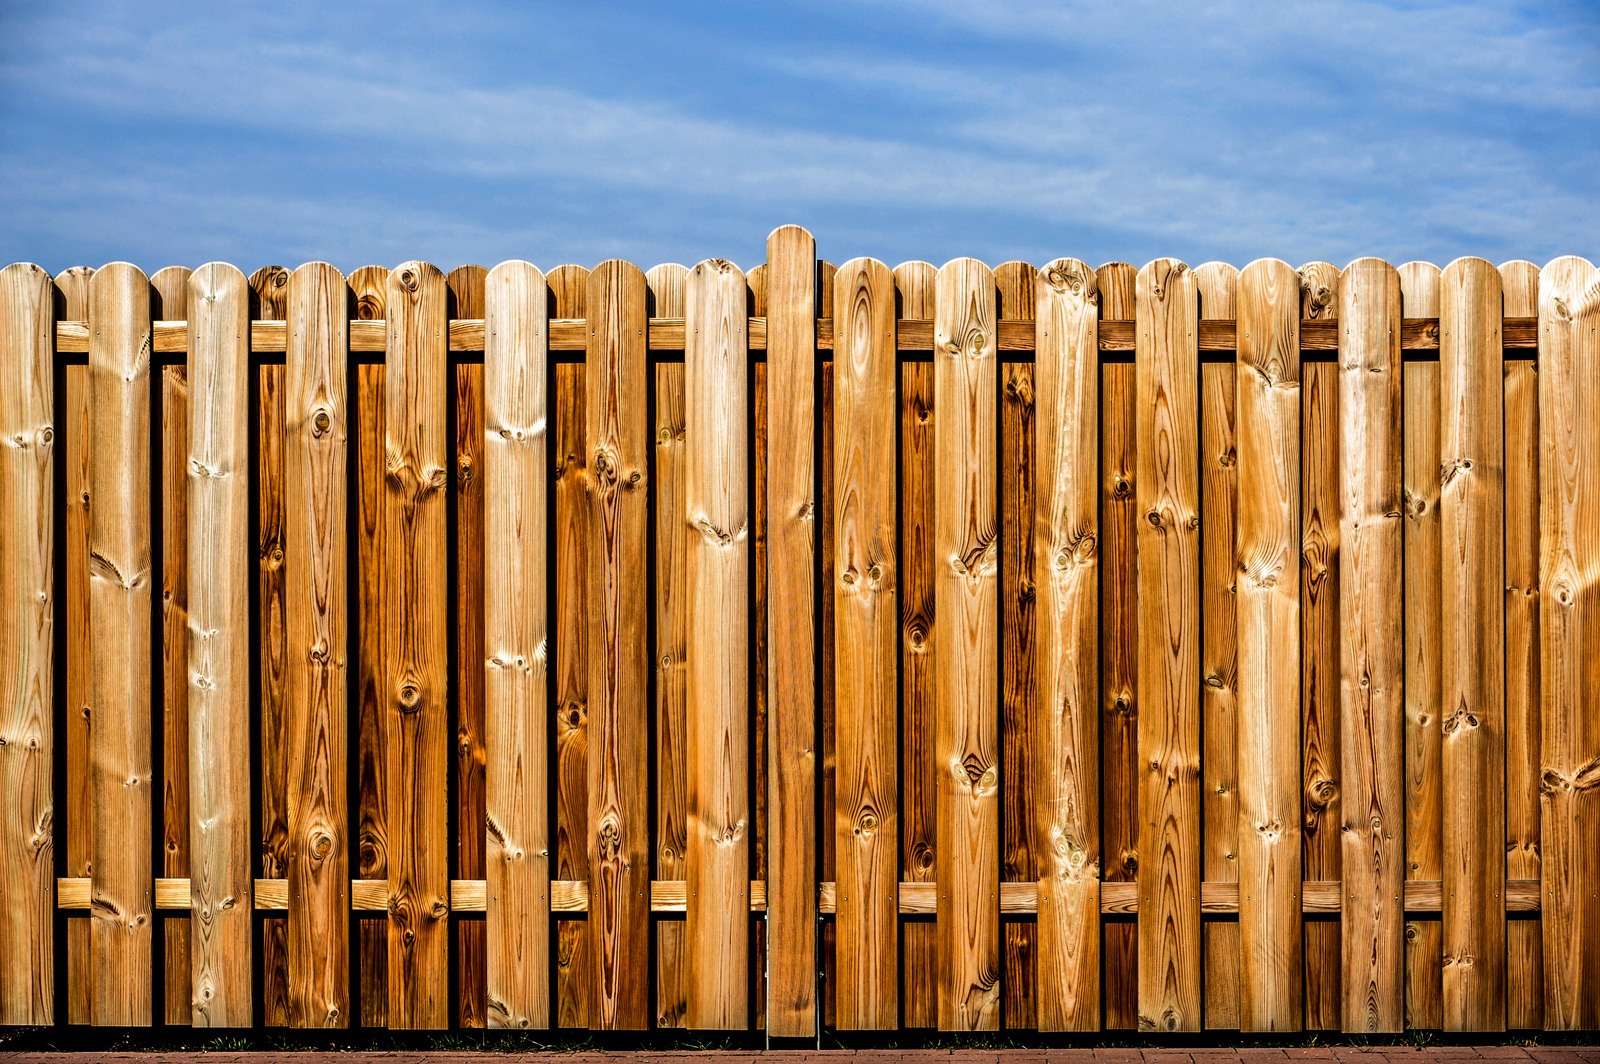 Fence Repair Services: The Crucial Expert Role to Safeguard Your Assets